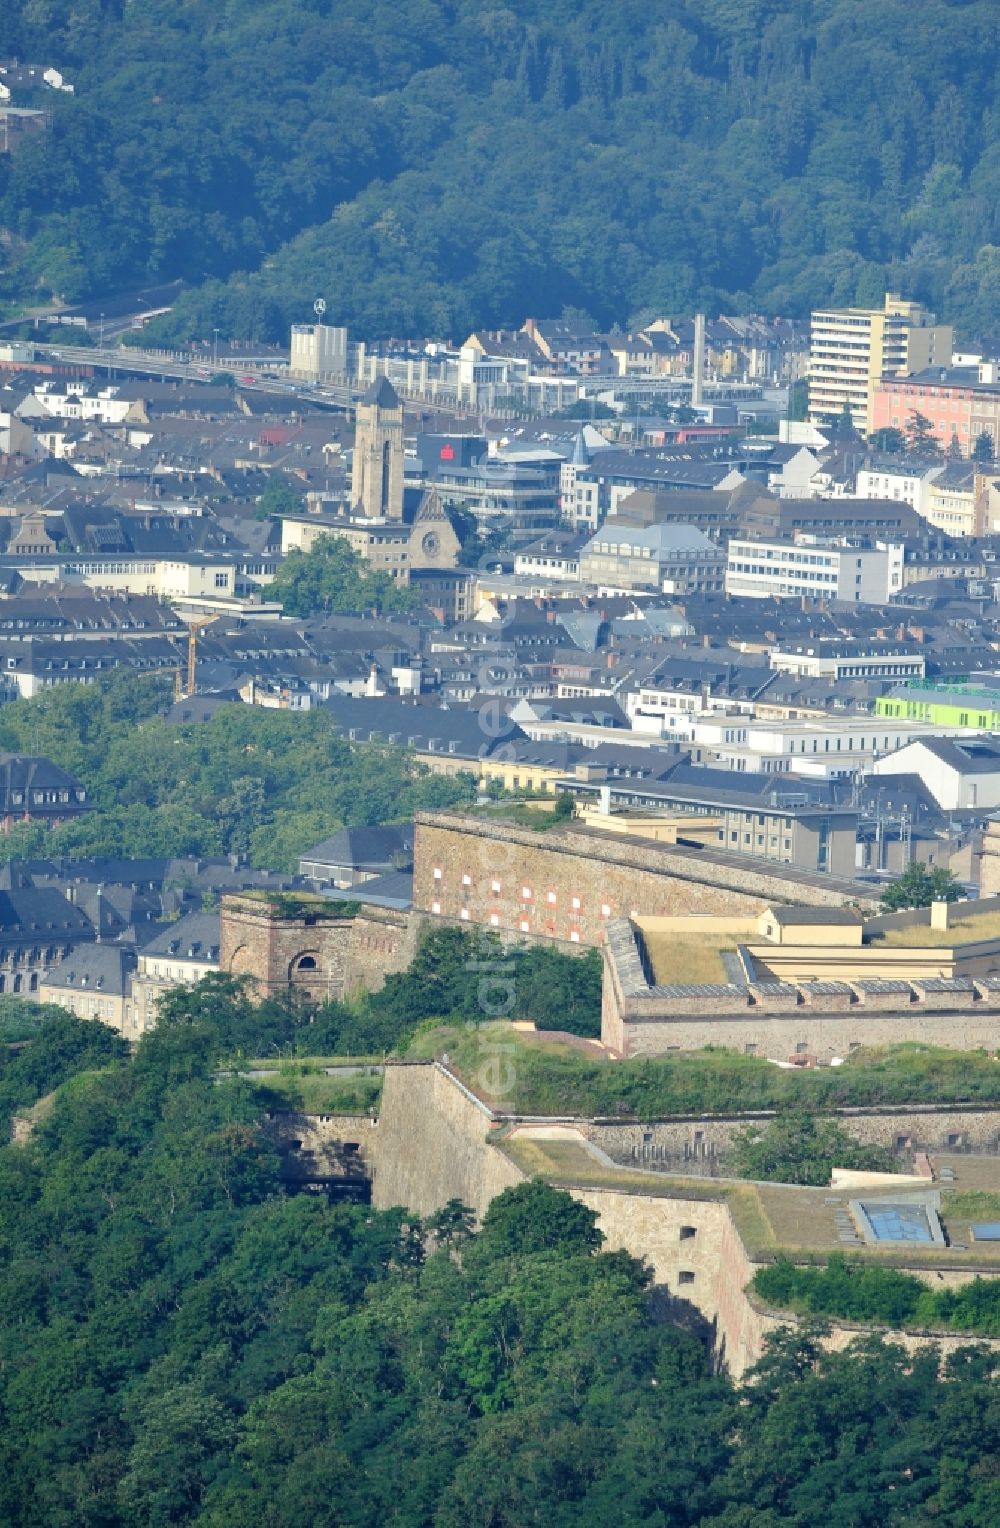 Koblenz from above - View of the fort Ehrenbreitstein across from the mouth of the Moselle near Koblenz. The fortification, which has existed since the 16. century, was used by the Prussian army until 1918 and is now owned by the state of Rhineland-Palatinate. It houses the State Museum Koblenz, the hostel Koblenz, the memorial of the German land forces as well as various administrative agencies. Since 2002, the fortress is a UNESCO World Heritage Upper Middle Rhine Valley, and cultural property protected under the Hague Convention